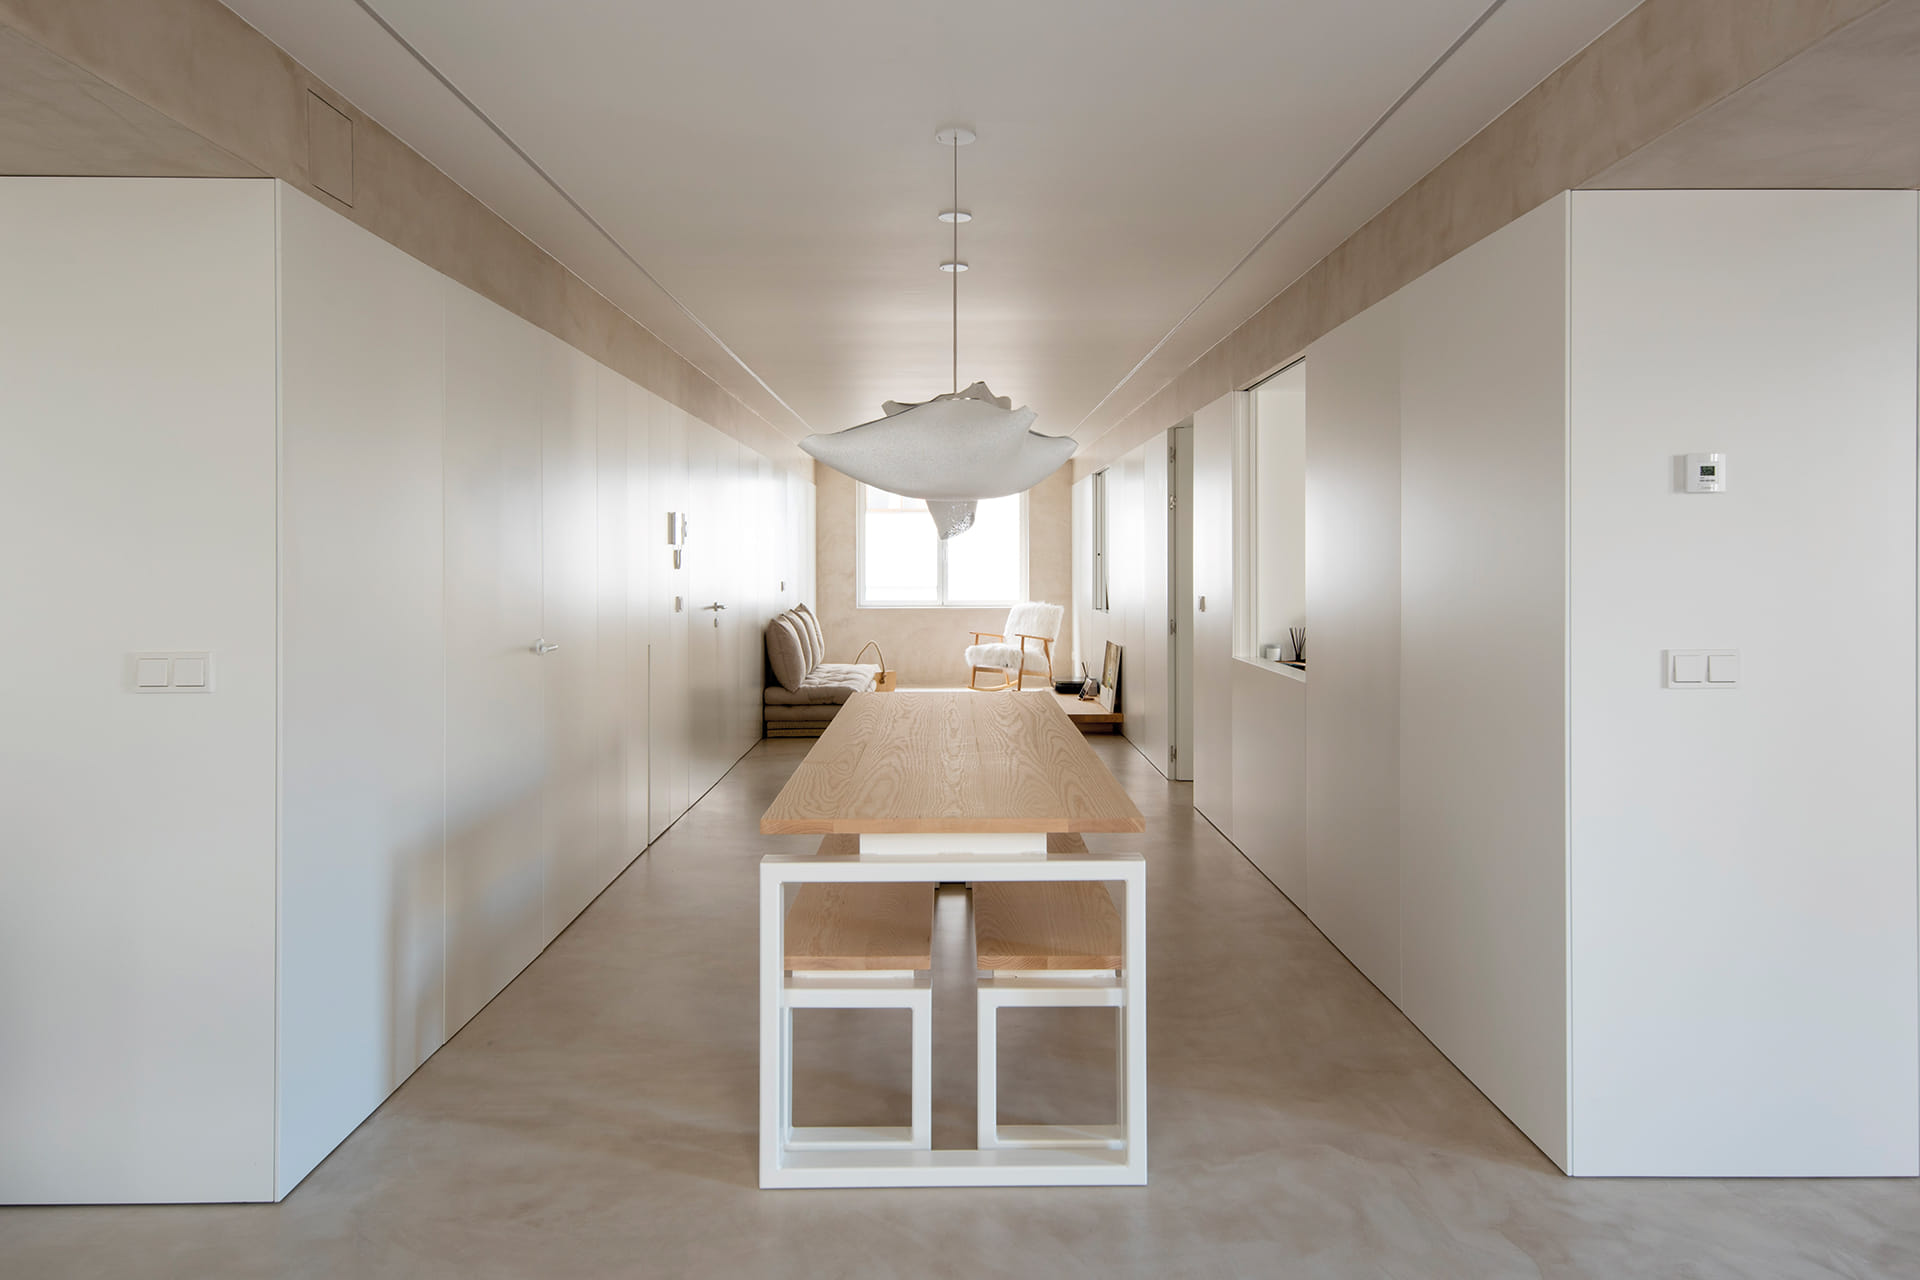 Dining area with white and wood table and benches